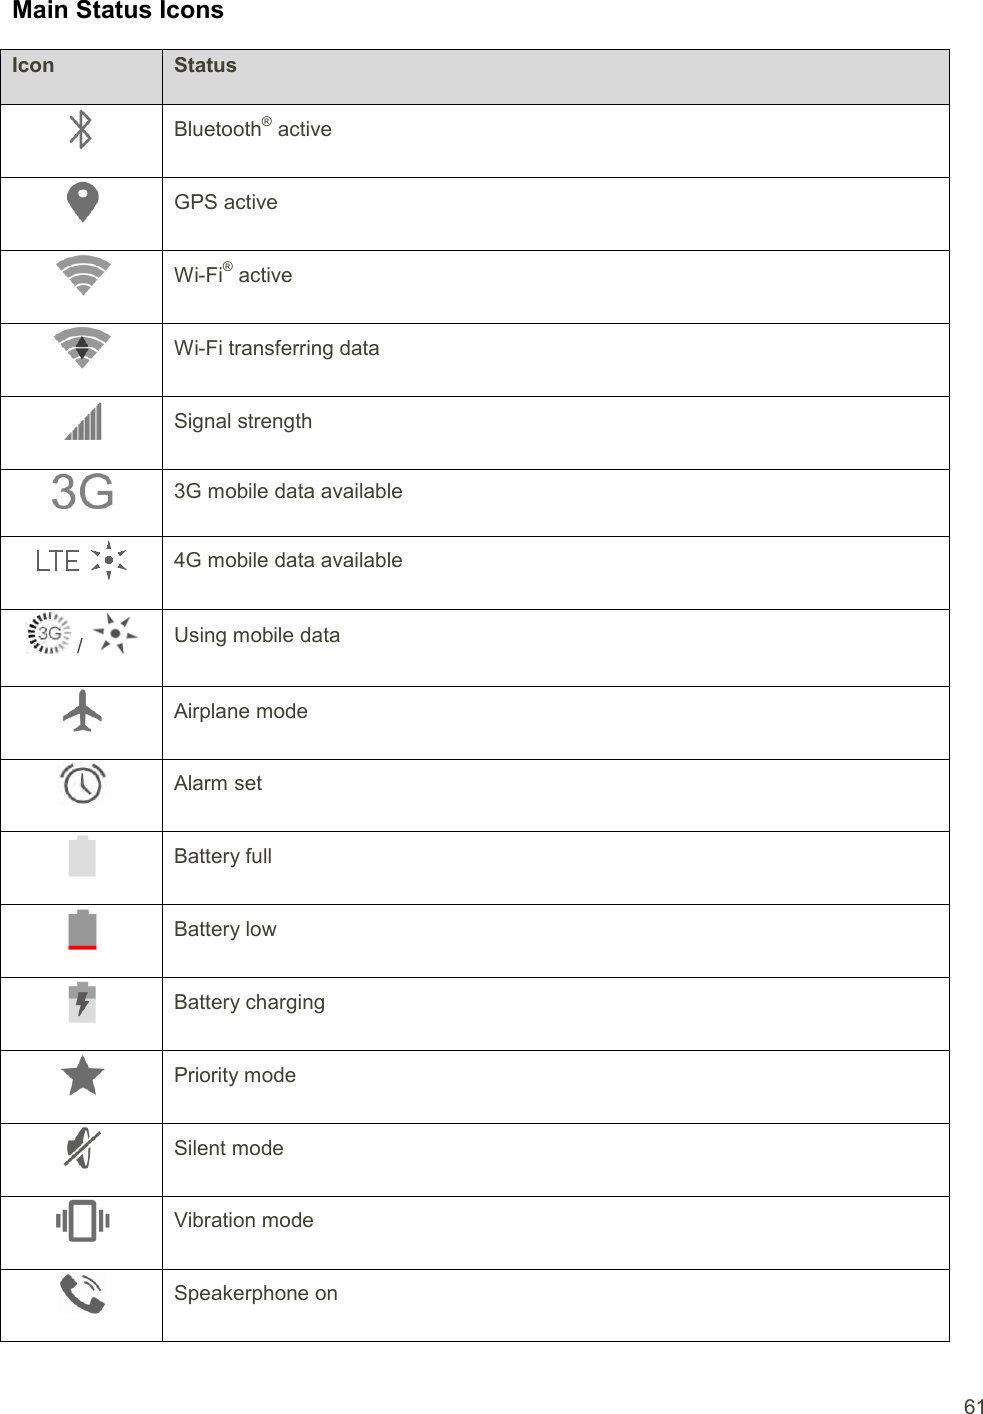  61 Main Status Icons Icon Status  Bluetooth® active  GPS active  Wi-Fi® active  Wi-Fi transferring data  Signal strength  3G mobile data available  4G mobile data available  /   Using mobile data  Airplane mode  Alarm set  Battery full  Battery low  Battery charging  Priority mode  Silent mode  Vibration mode  Speakerphone on 